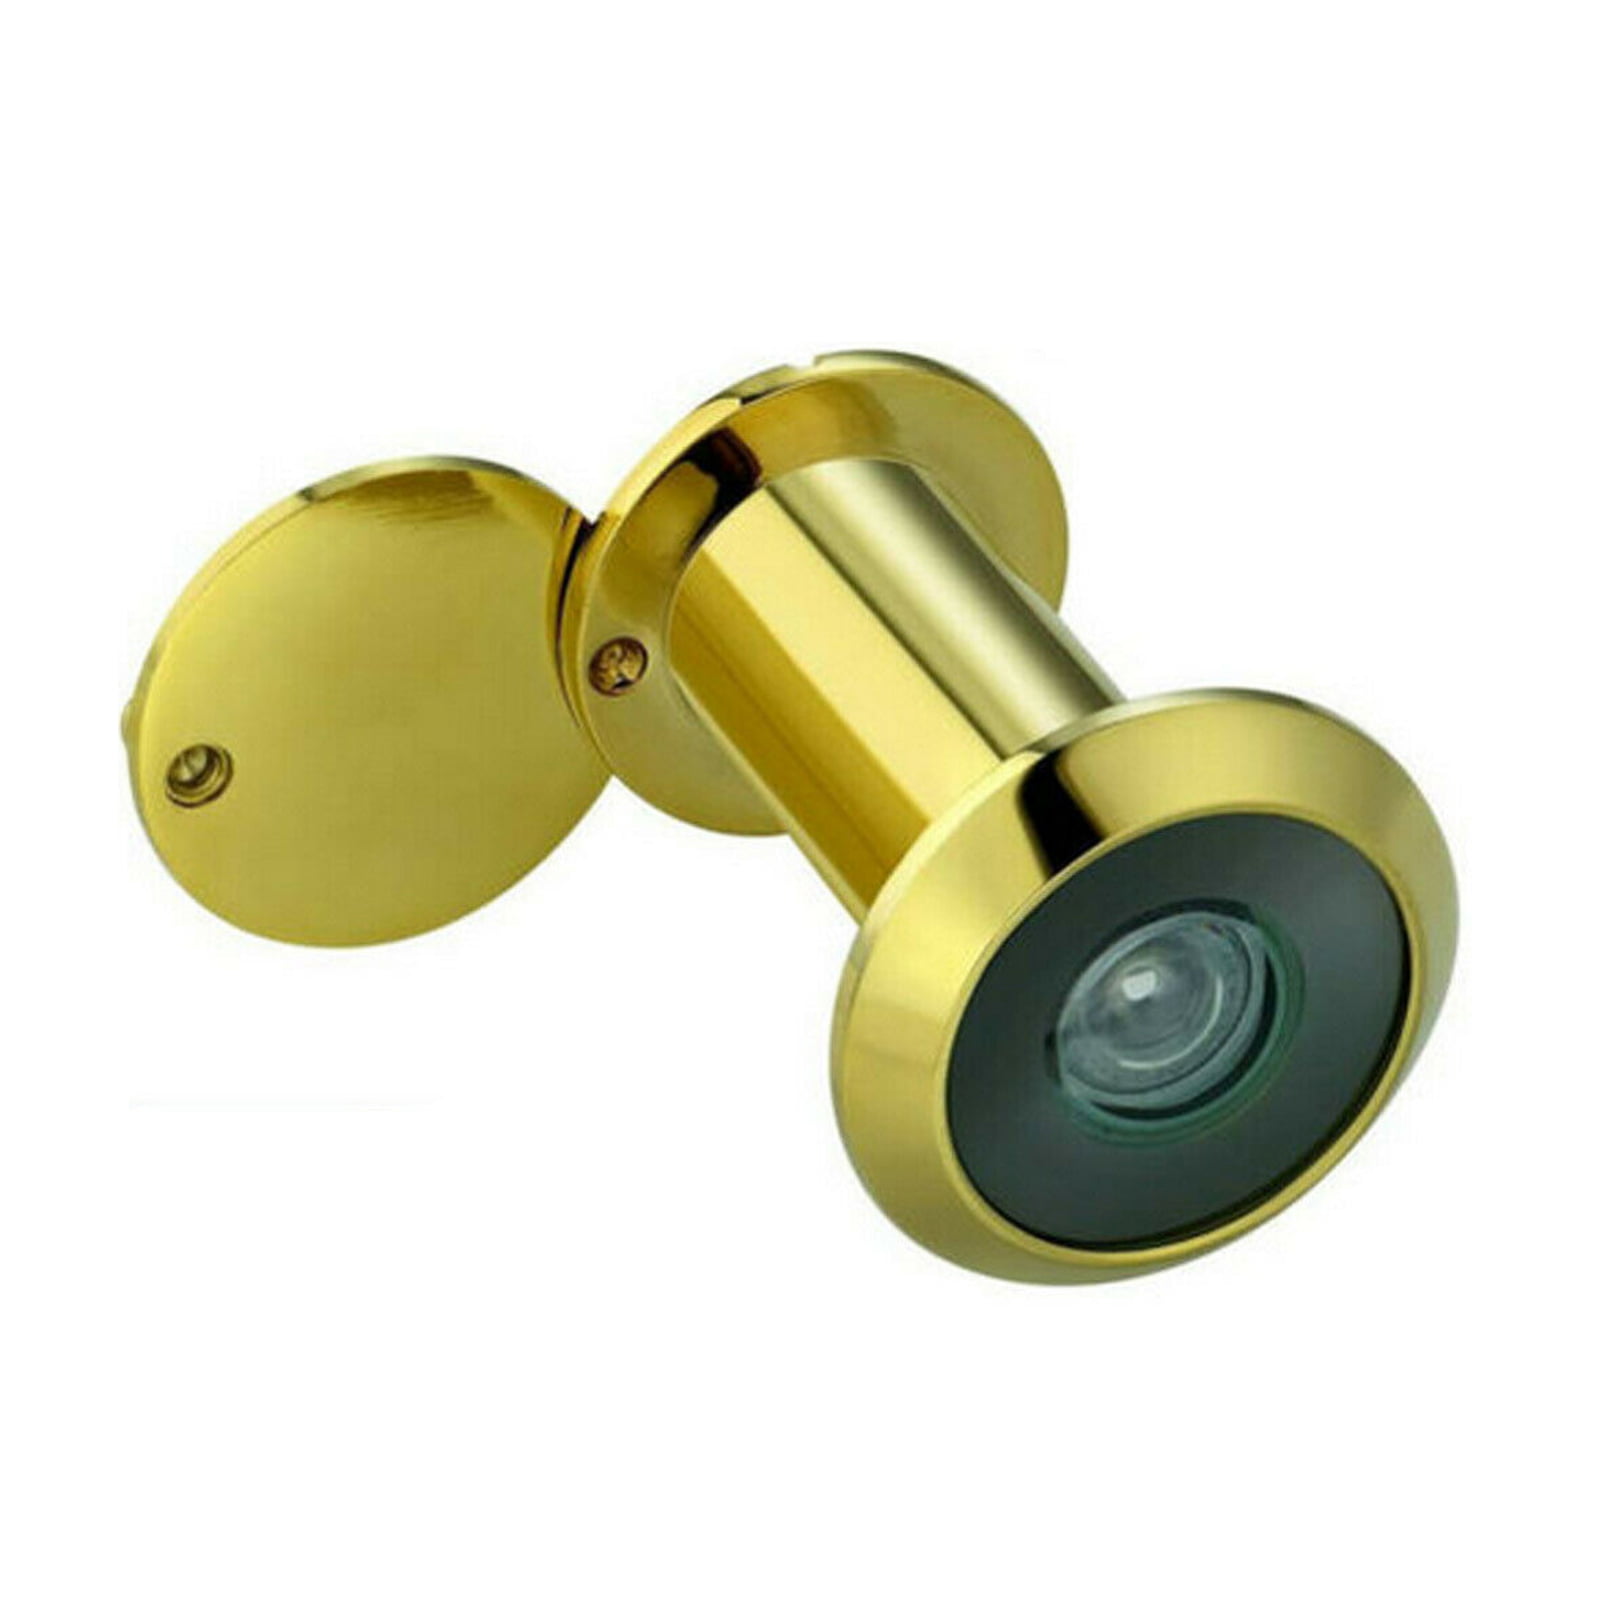 Carbon Gray Royal H&H Door Viewer as Security Peek Peep Hole for Home Office 200 Degree Solid Brass